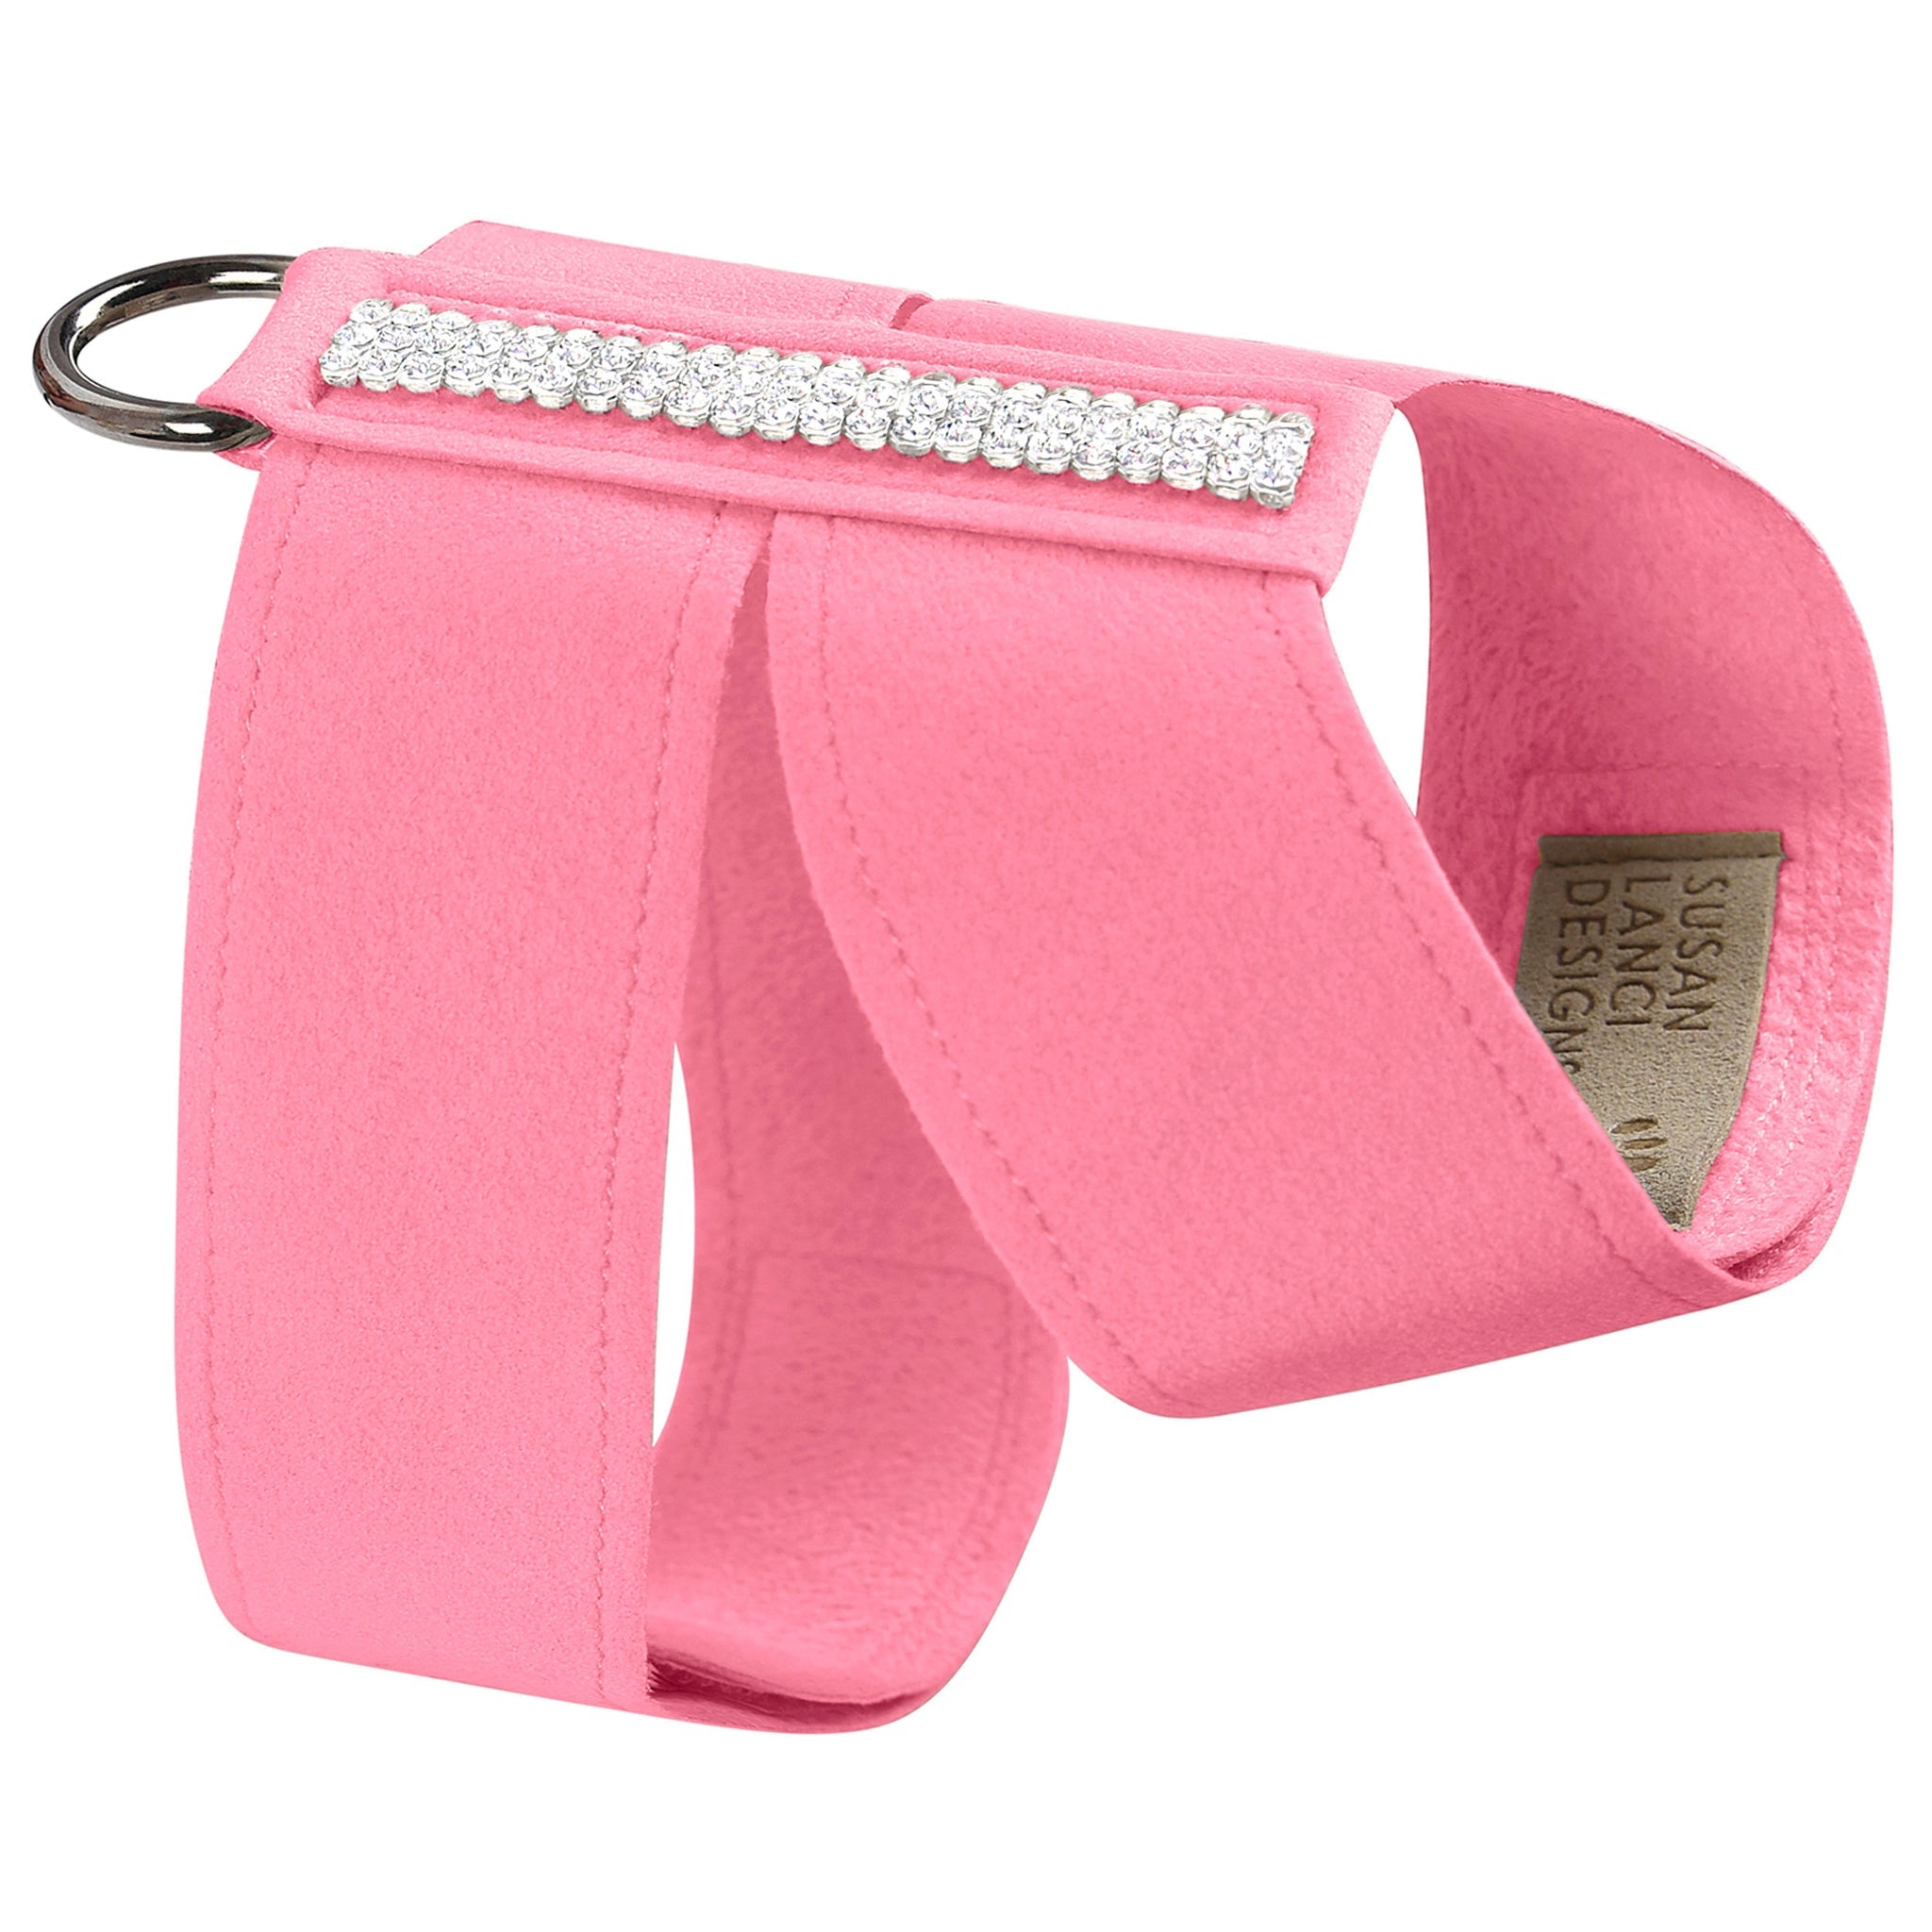 Giltmore 3-Row Crystal Pet Harness: Perfect Pink